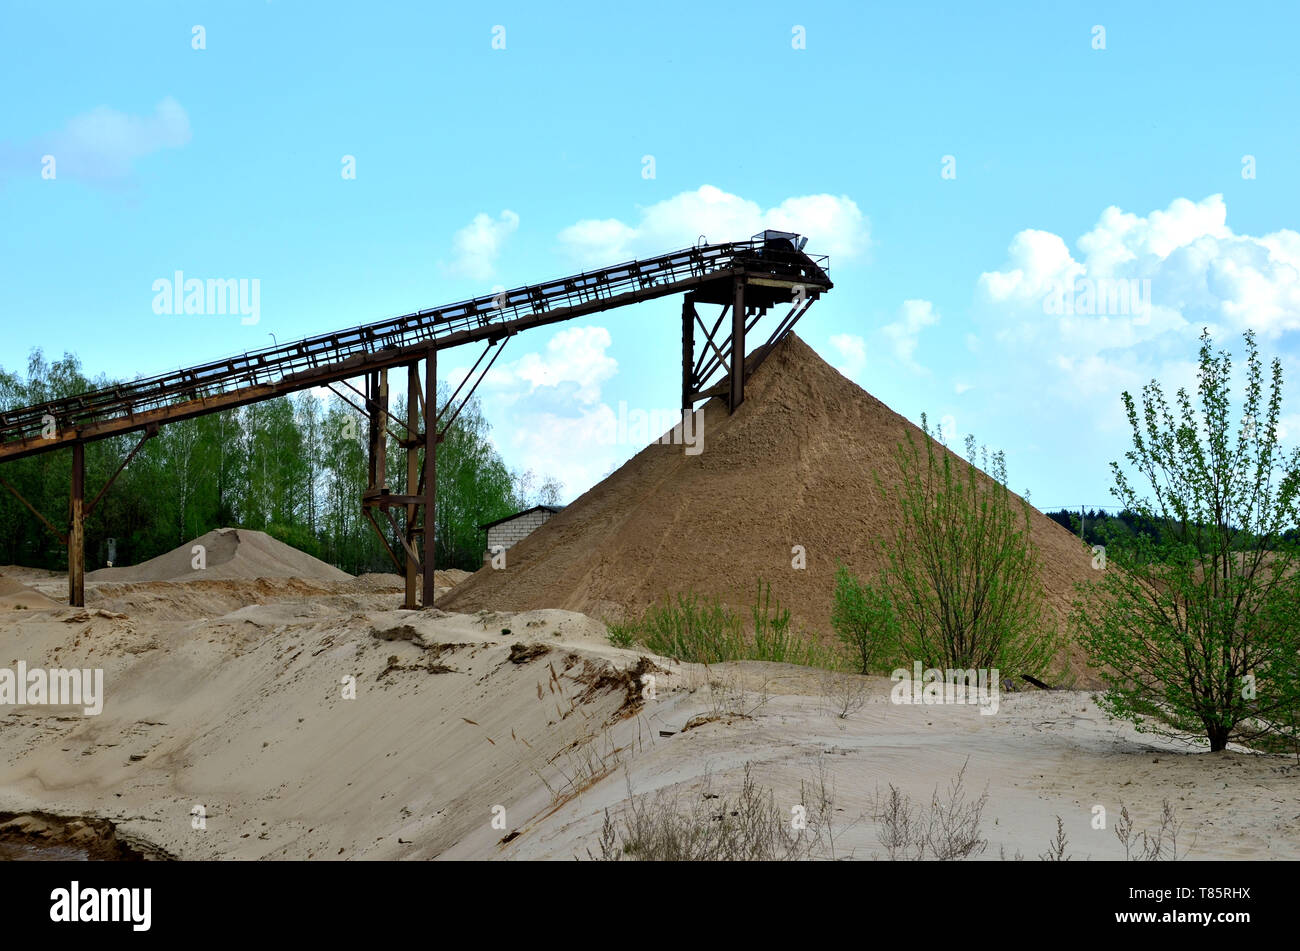 Sand Making Plant in mining quarry. Crushing factory, machines and equipment for crushing, grinding stone, sorting sand and bulk materials. Stock Photo